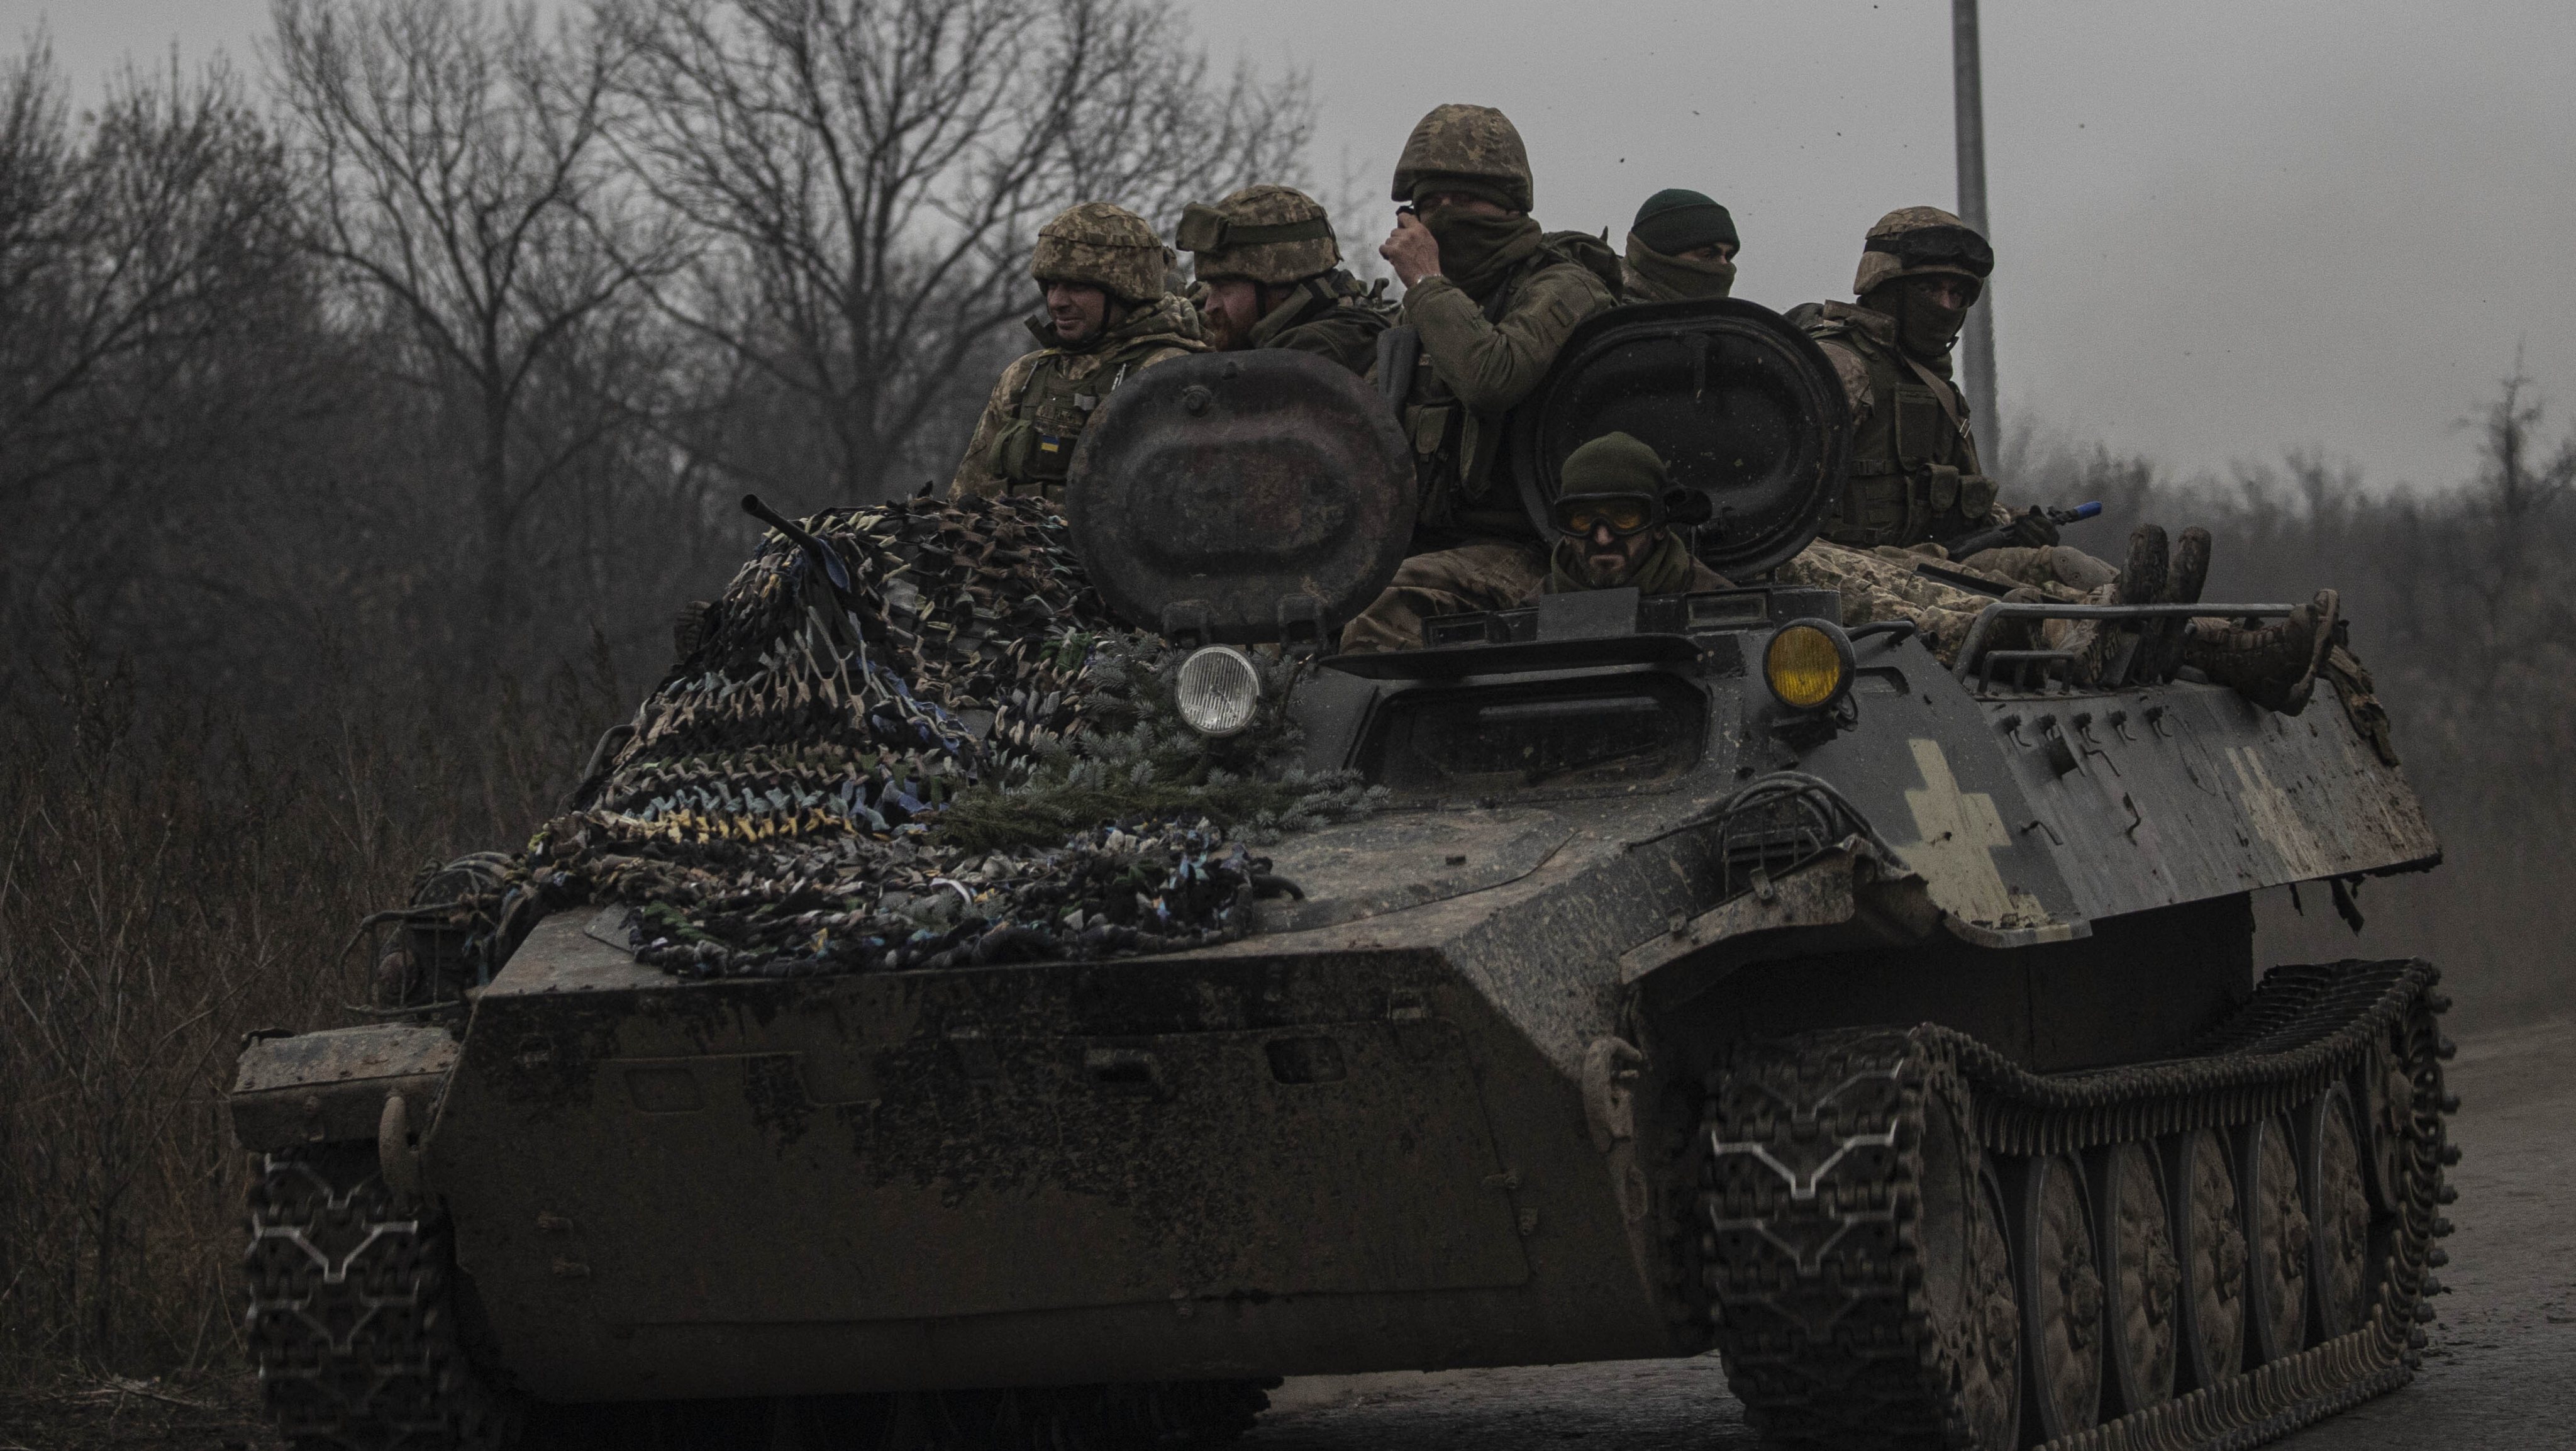 Military activity of the Ukrainian army in the Donetsk region